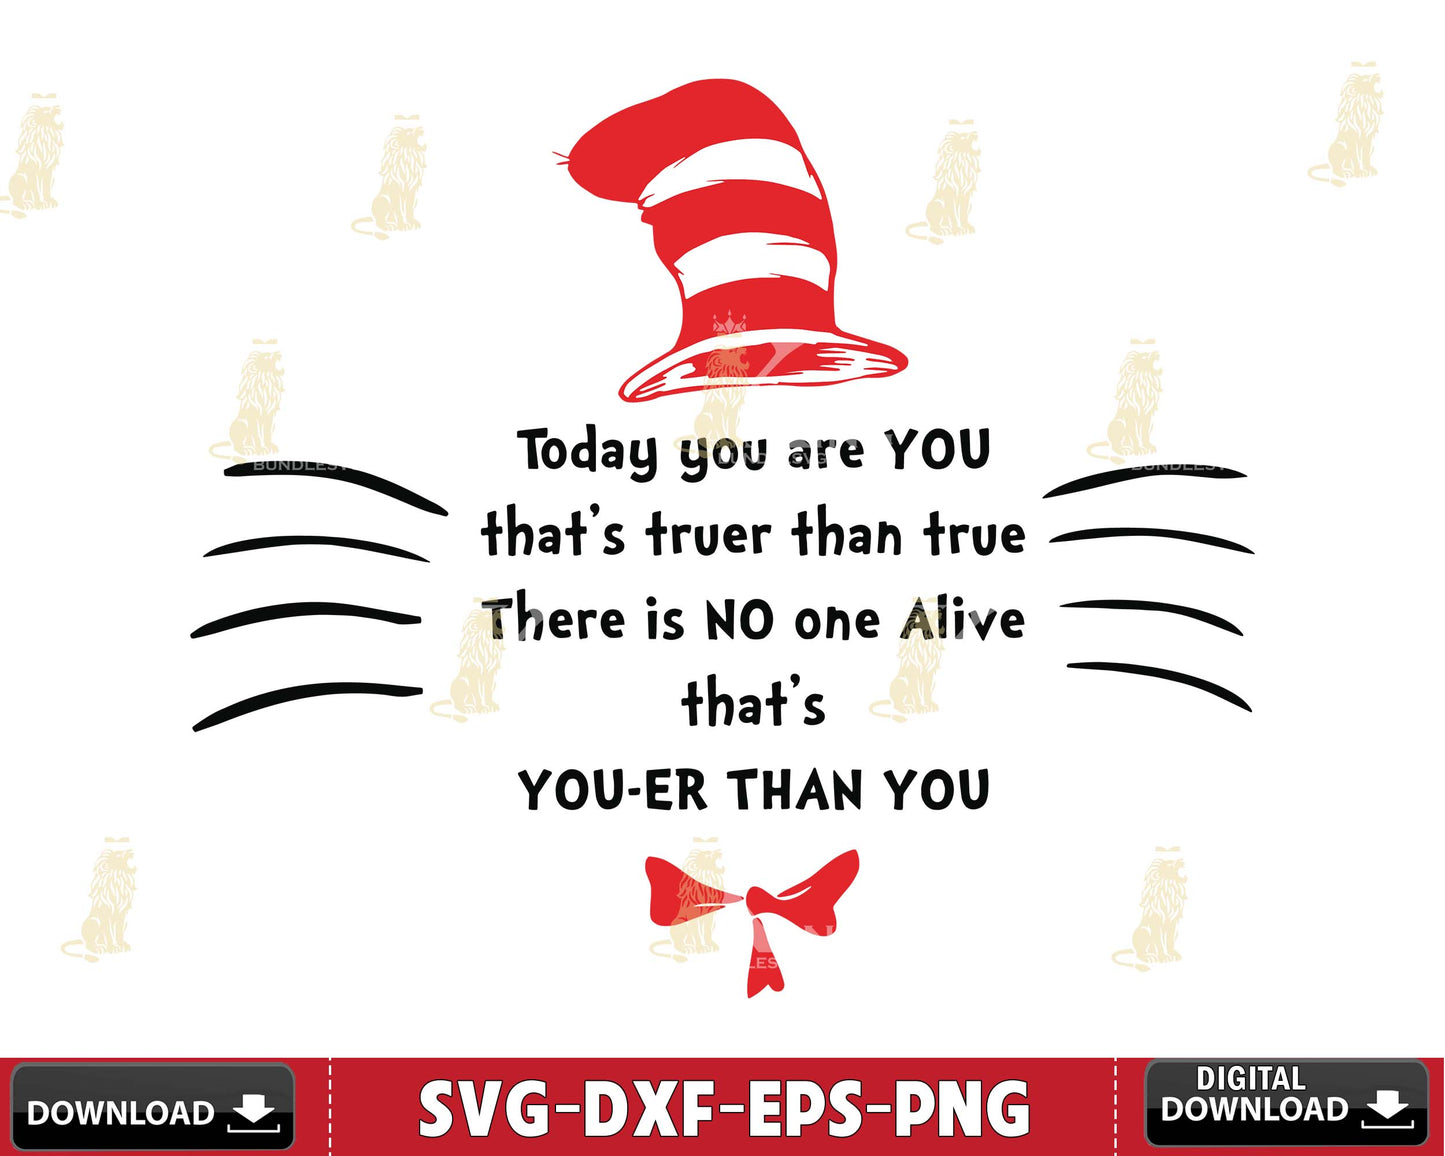 Dr Seuss Today you are you that's truer than true there is no one aliv ...